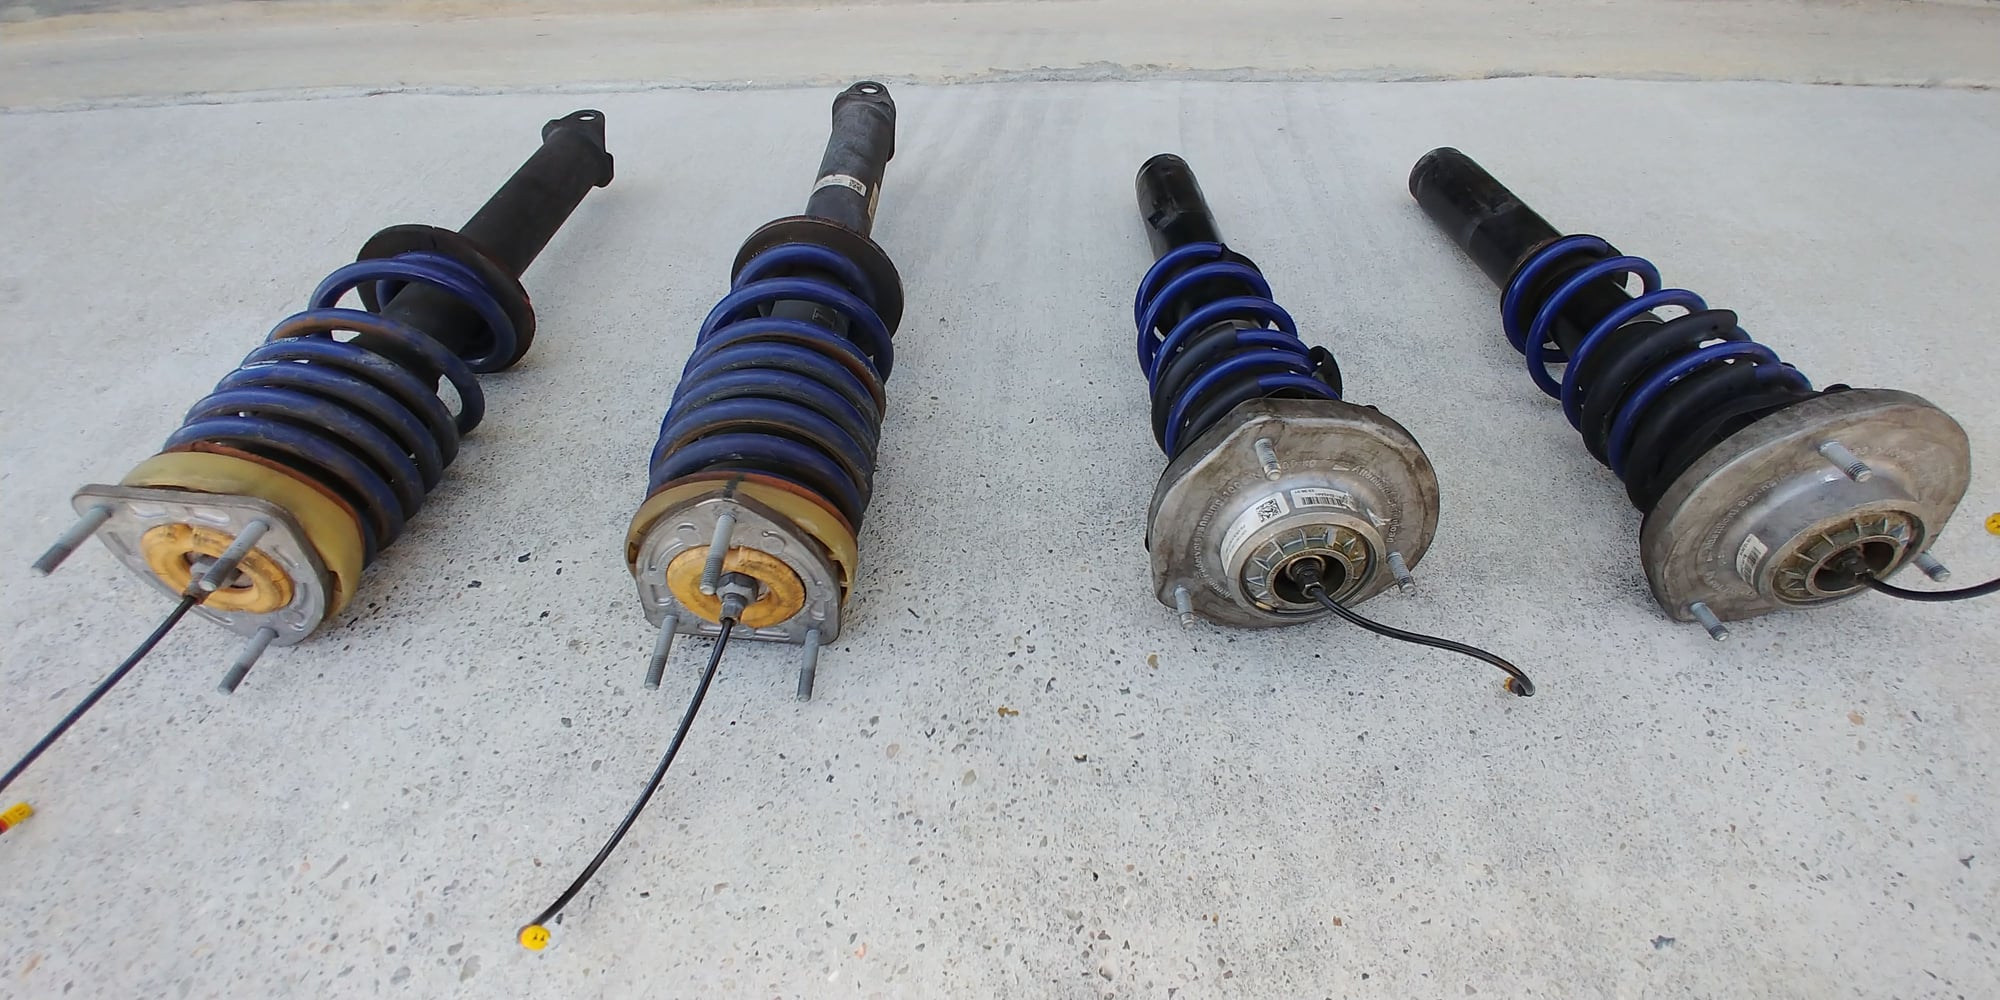 Steering/Suspension - GMG lowering springs and EDC strut assembly (4) - Used - 2012 to 2019 Porsche GT2 - 2012 to 2019 Porsche GT3 - 2012 to 2019 Porsche 911 - 2012 to 2019 Porsche Carrera - Ocean Springs, MS 39564, United States